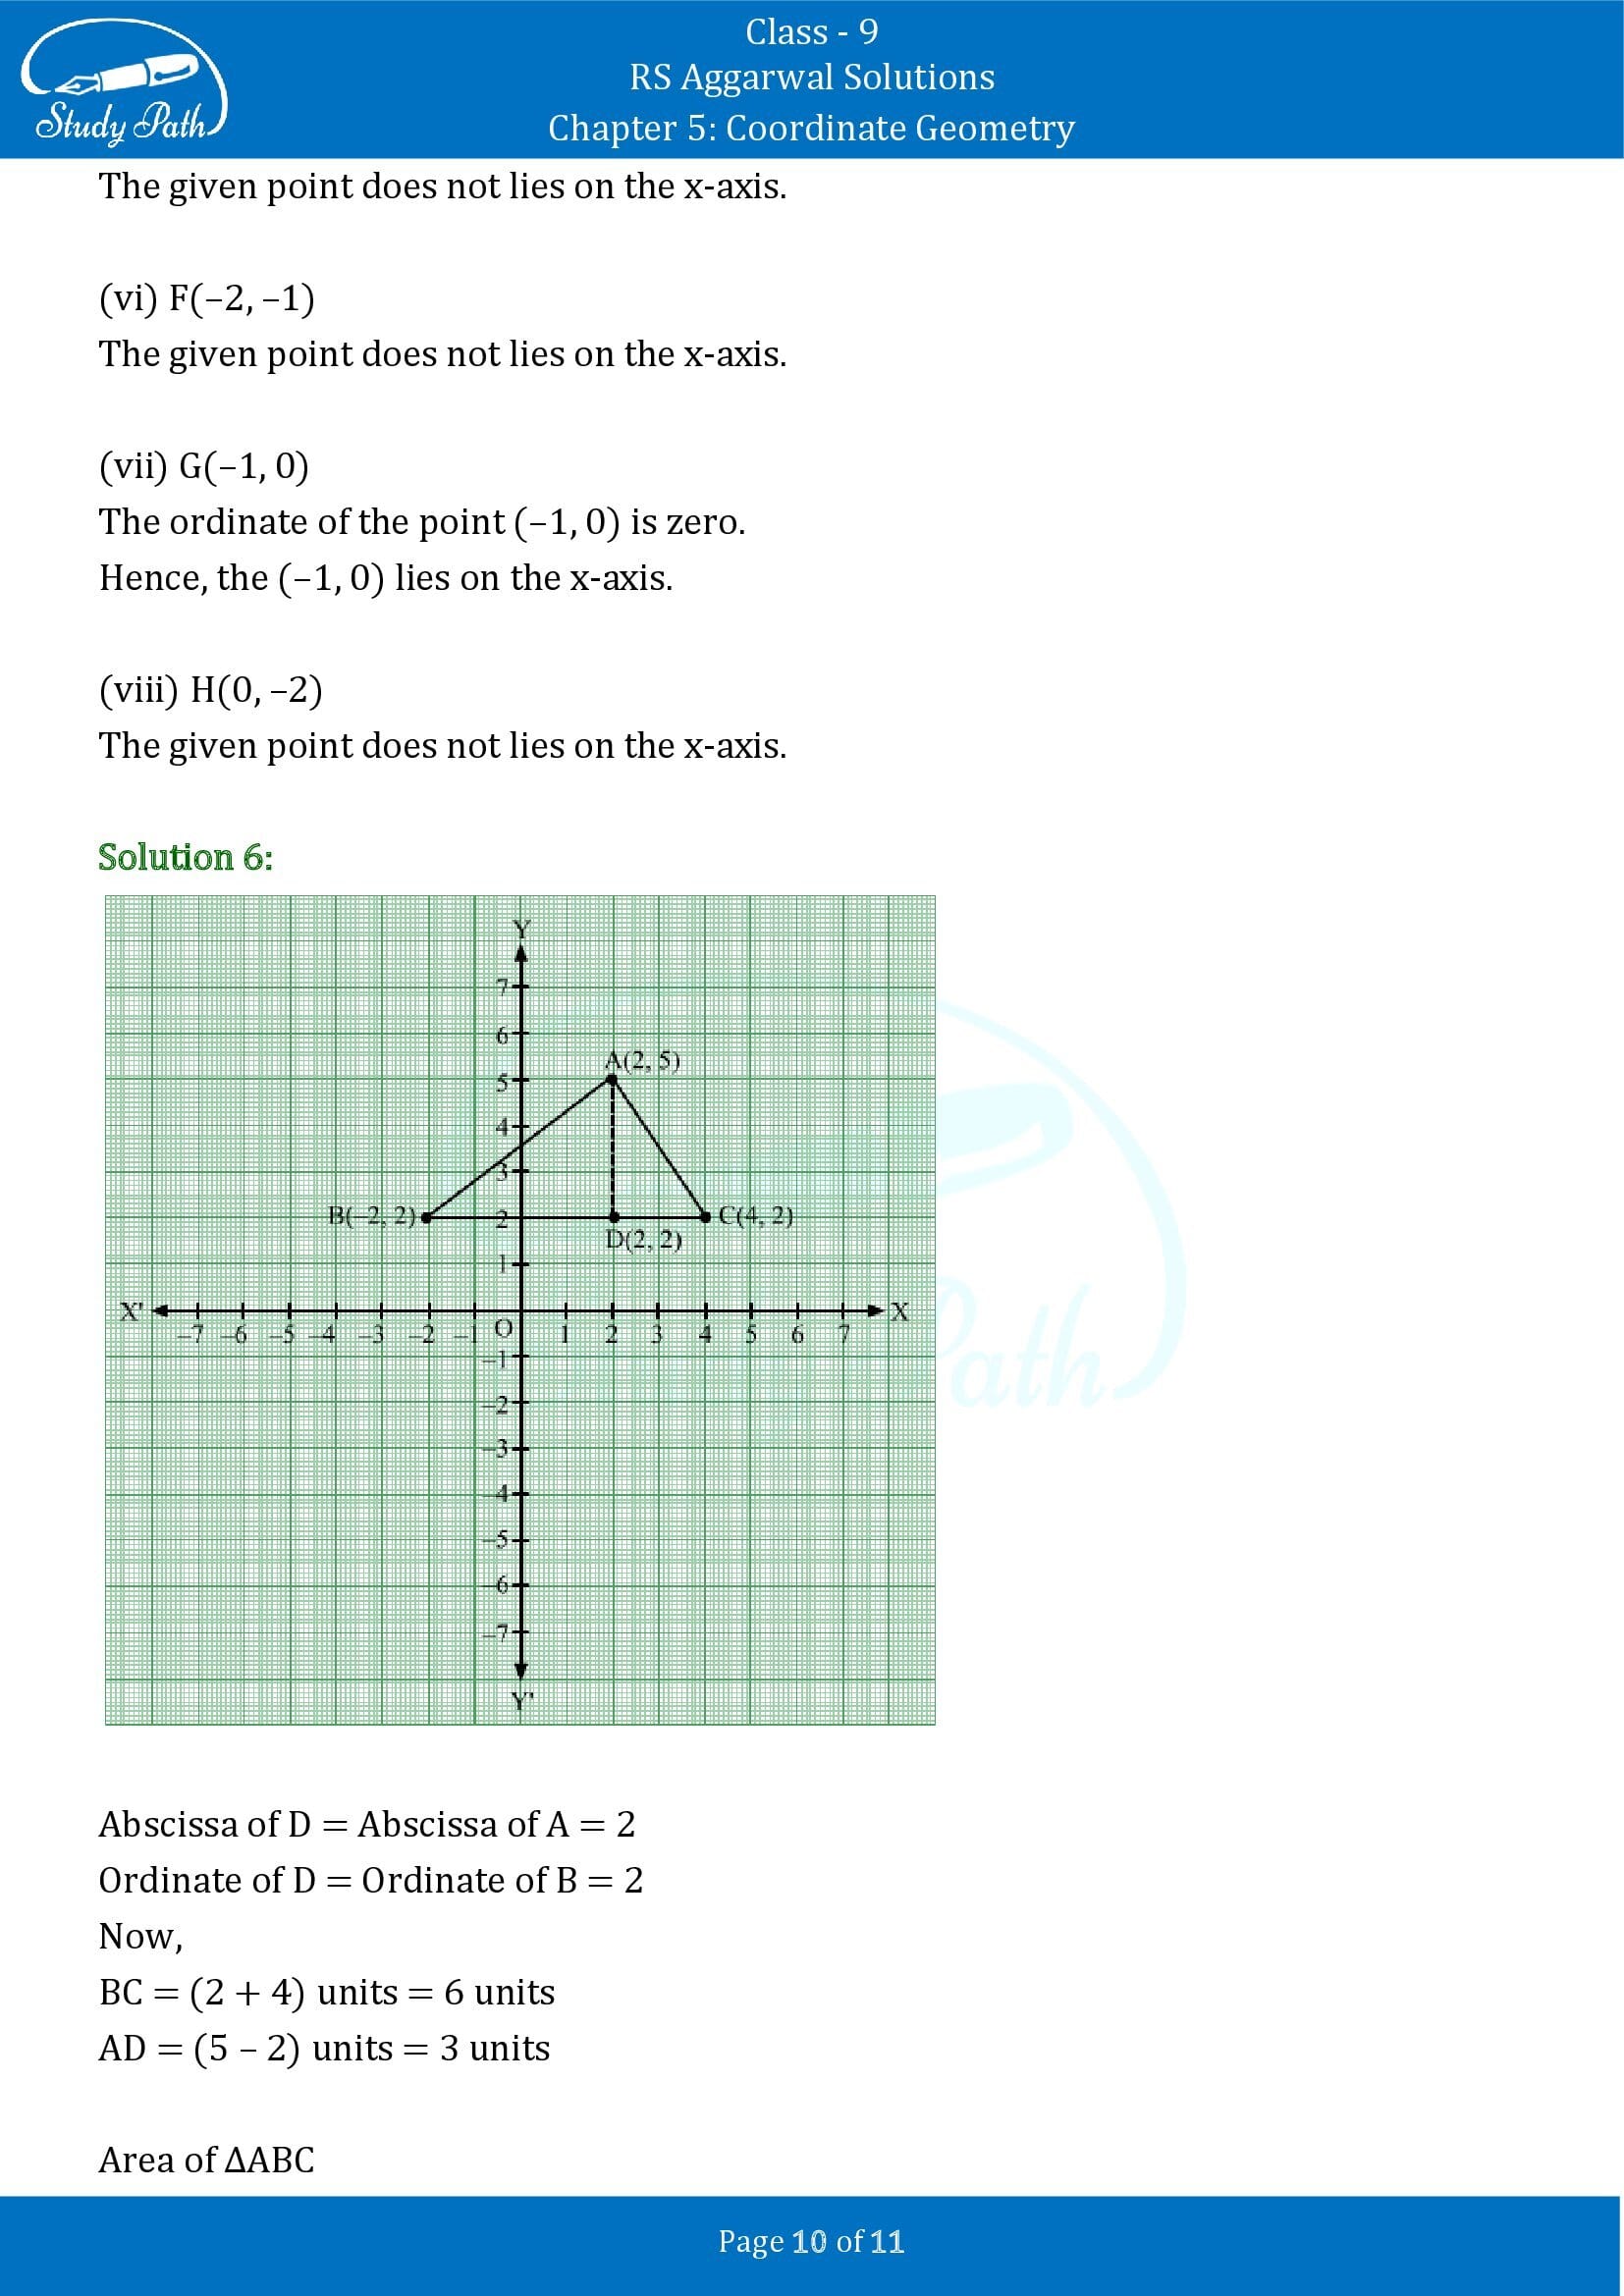 RS Aggarwal Solutions Class 9 Chapter 5 Coordinate Geometry Exercise 5 00010